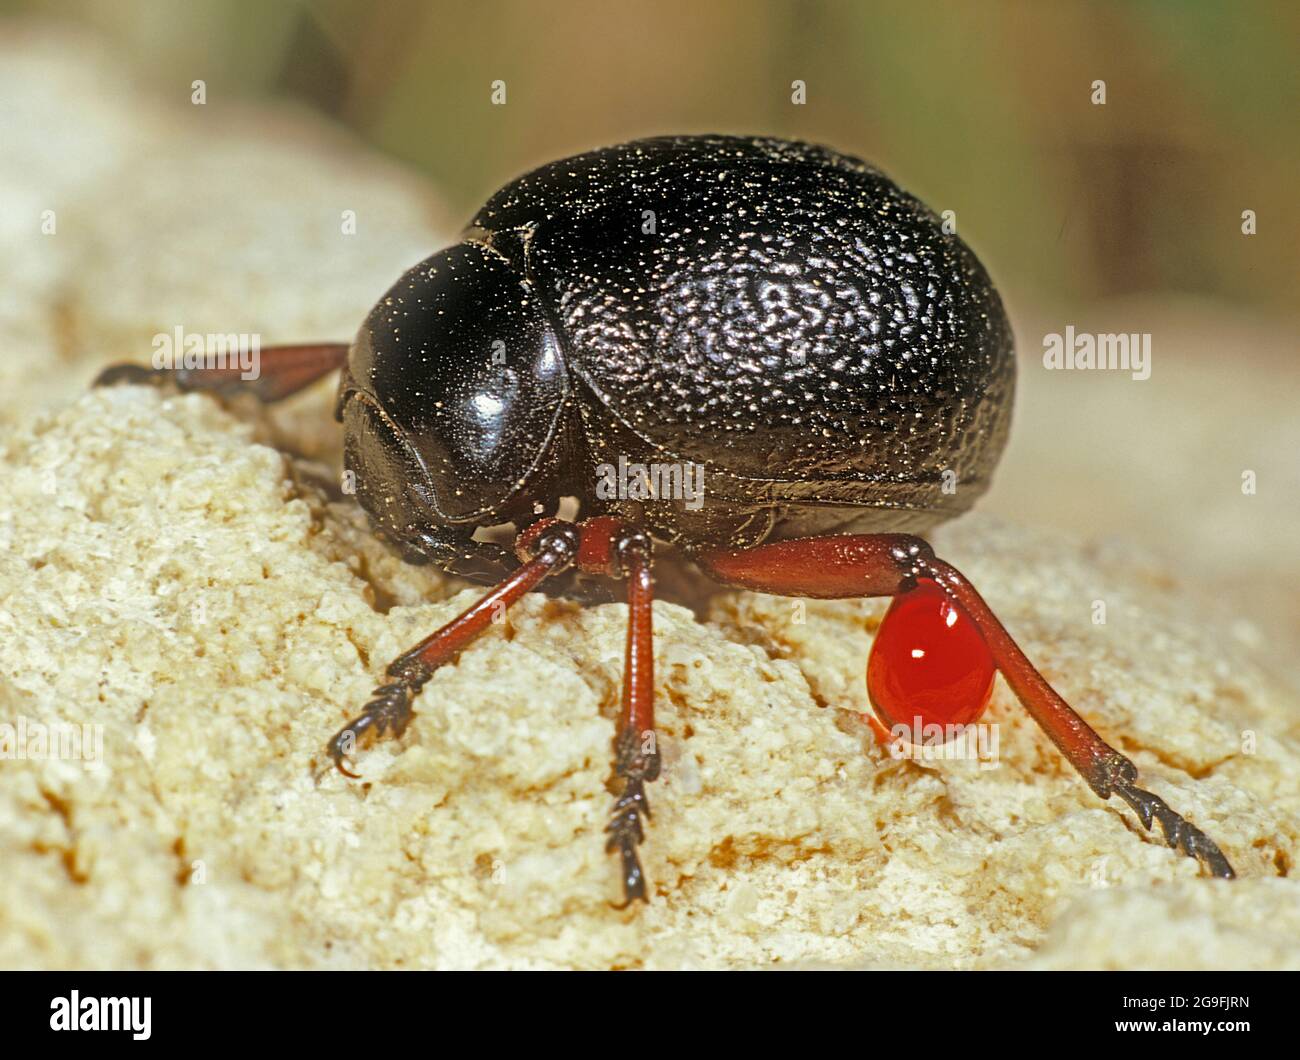 To ward off enemies, a beetle (presumably family Scarabaeidae) excretes a drop of blood from the knee joint. Germany Stock Photo